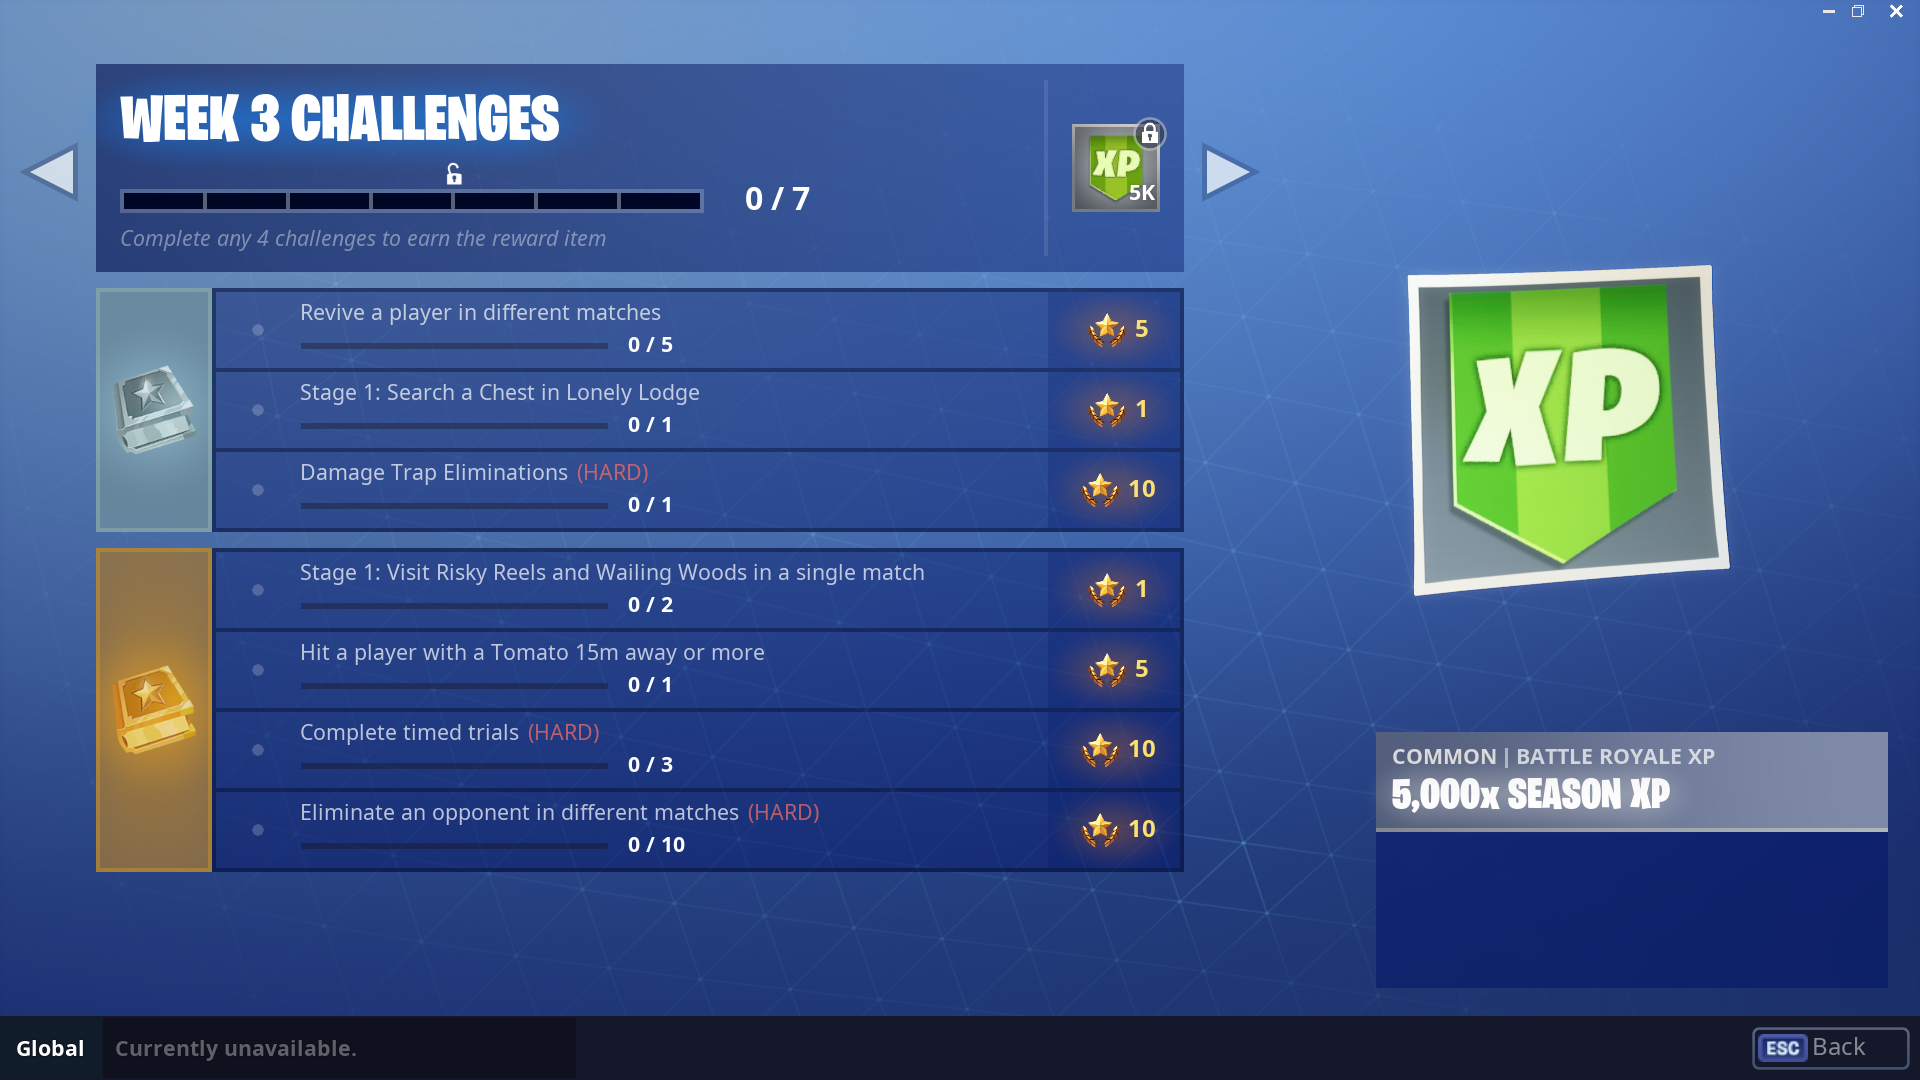 Free Battle Pass Challenges For Week 3 Season 6 Of Fortnite - free battle pass challenges for week 3 season 6 of fortnite battle royale with solutions fortnite news and statistics ss1